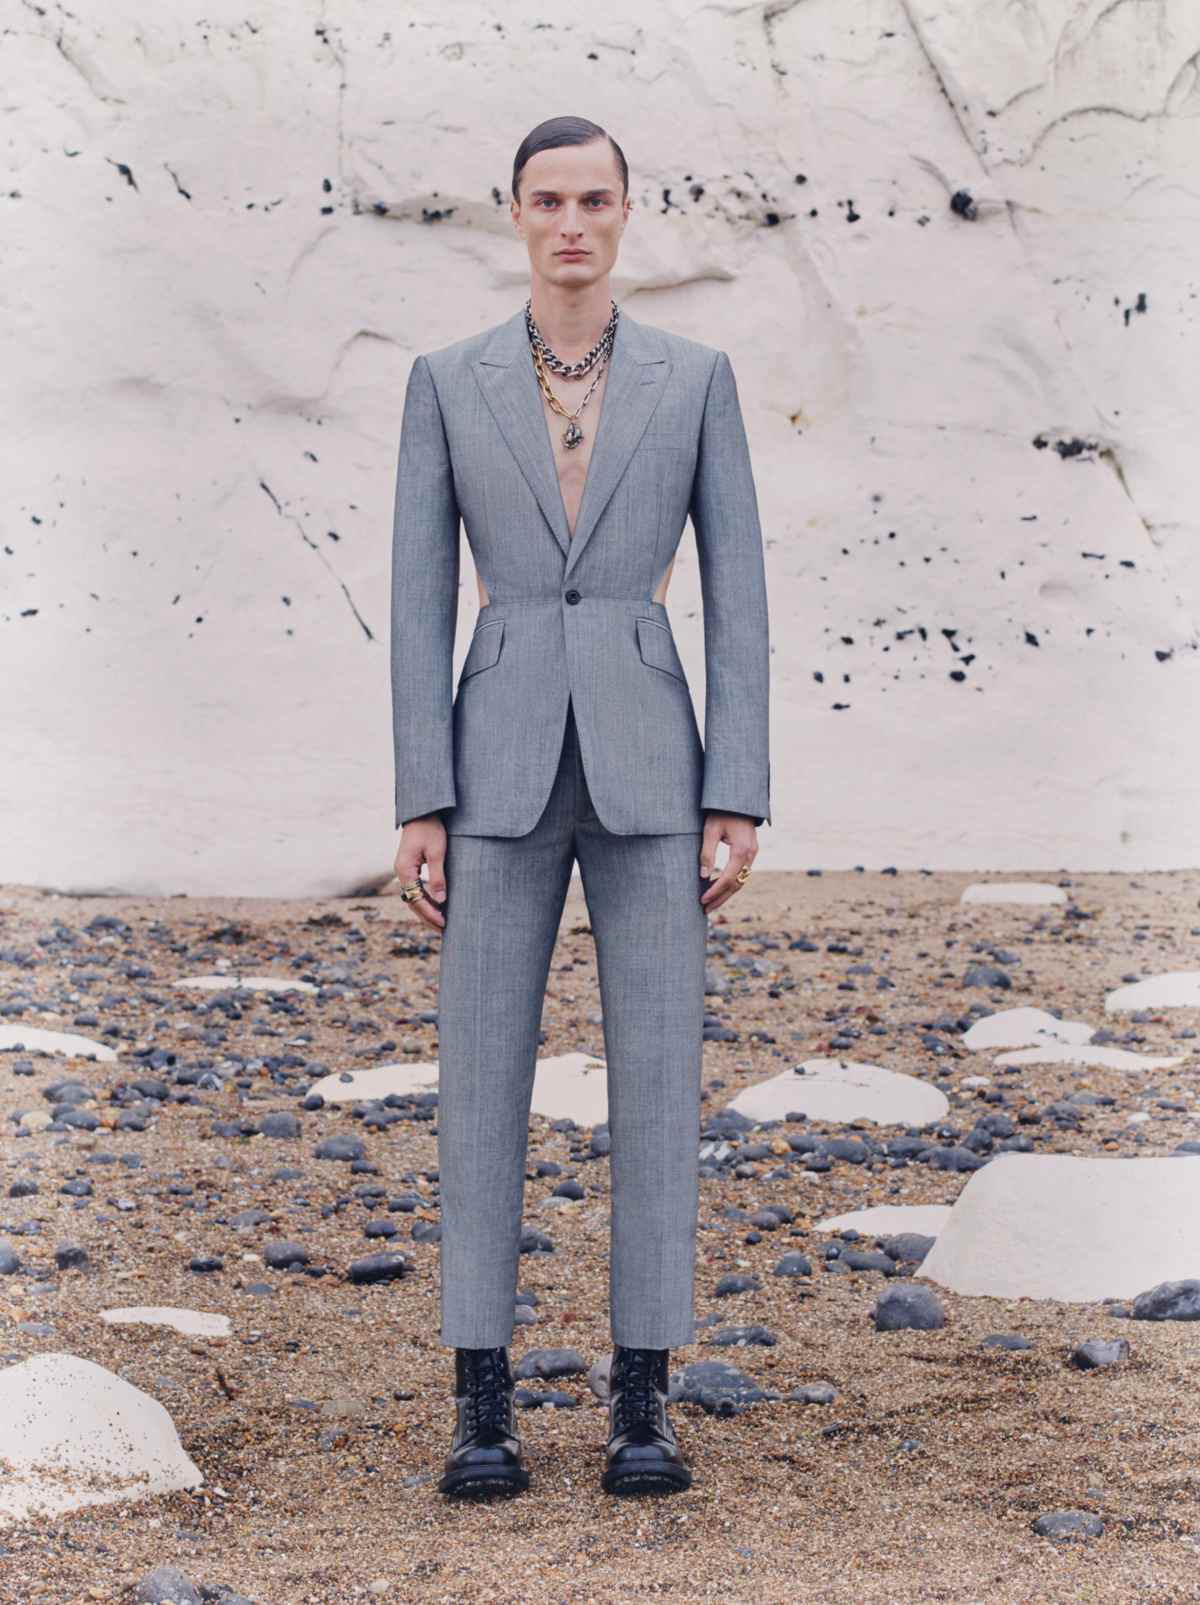 Unique Tailoring Tradition Of The House Of Alexander McQueen